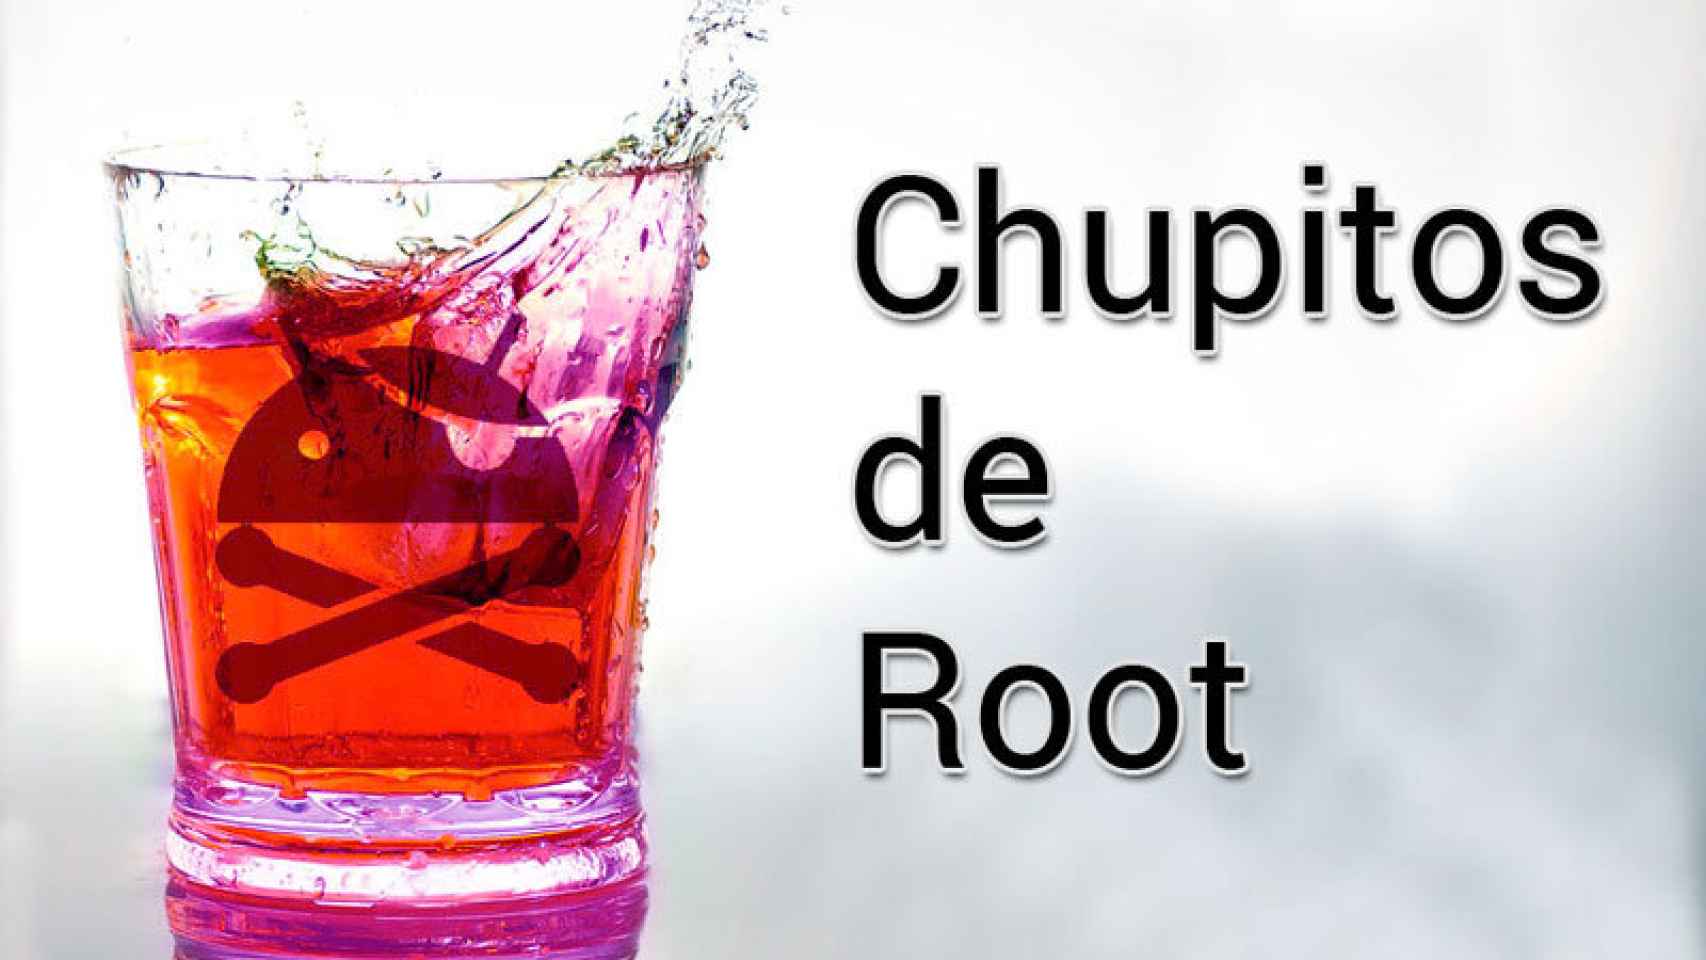 Chupitos de Root VIII: Battery Home Icon, Boot Animations y ChupaChups ROM